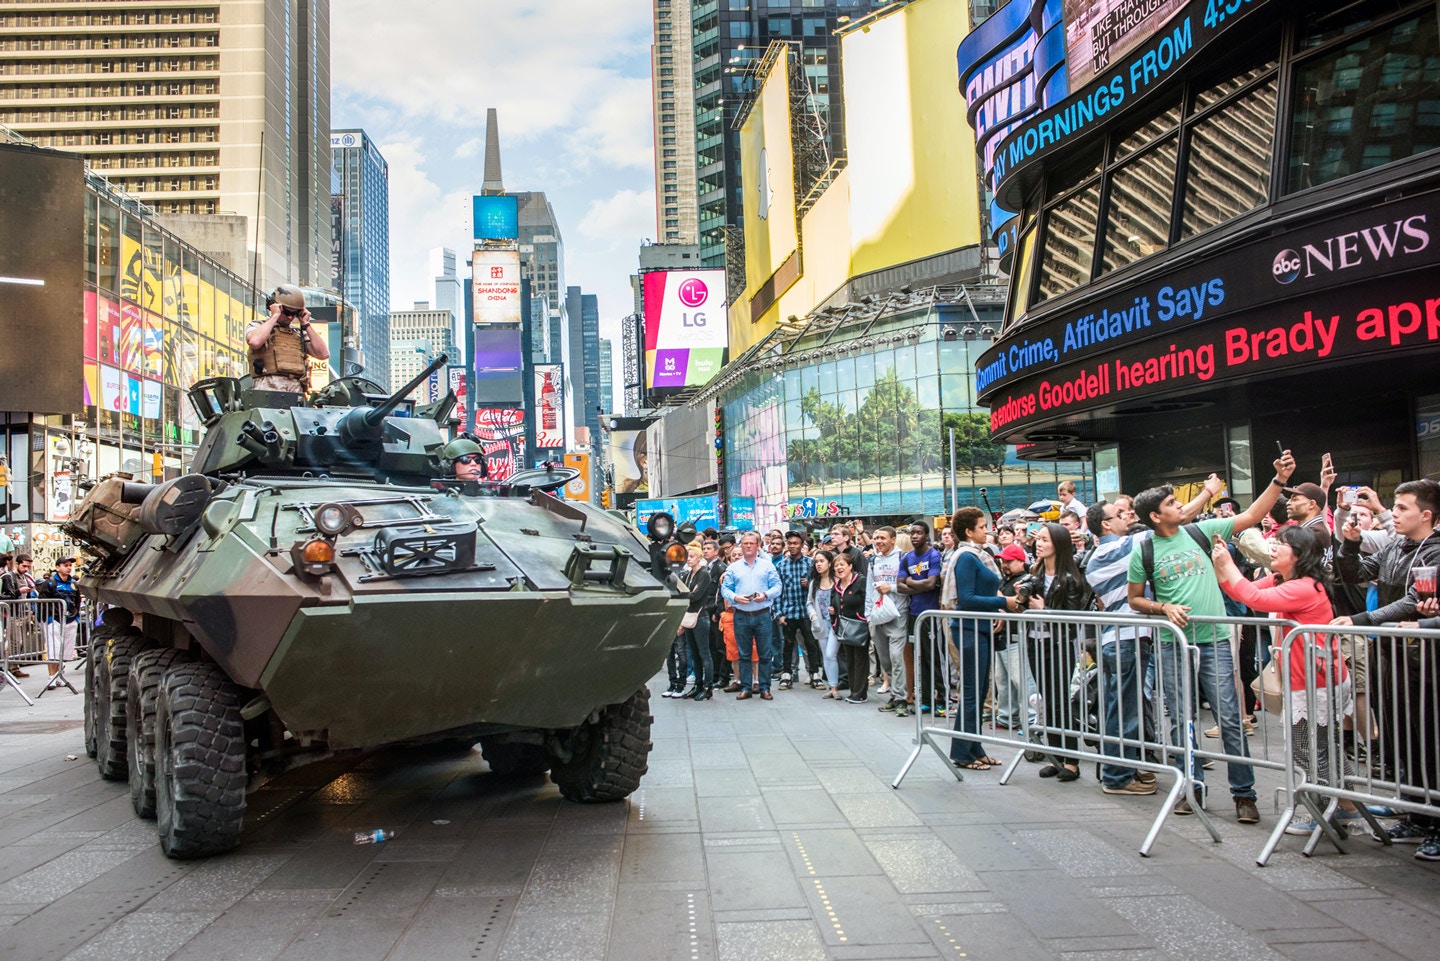 U.S. Marines arrive on a light armored vehicle in New York City’s Times Square during Fleet Week in 2015